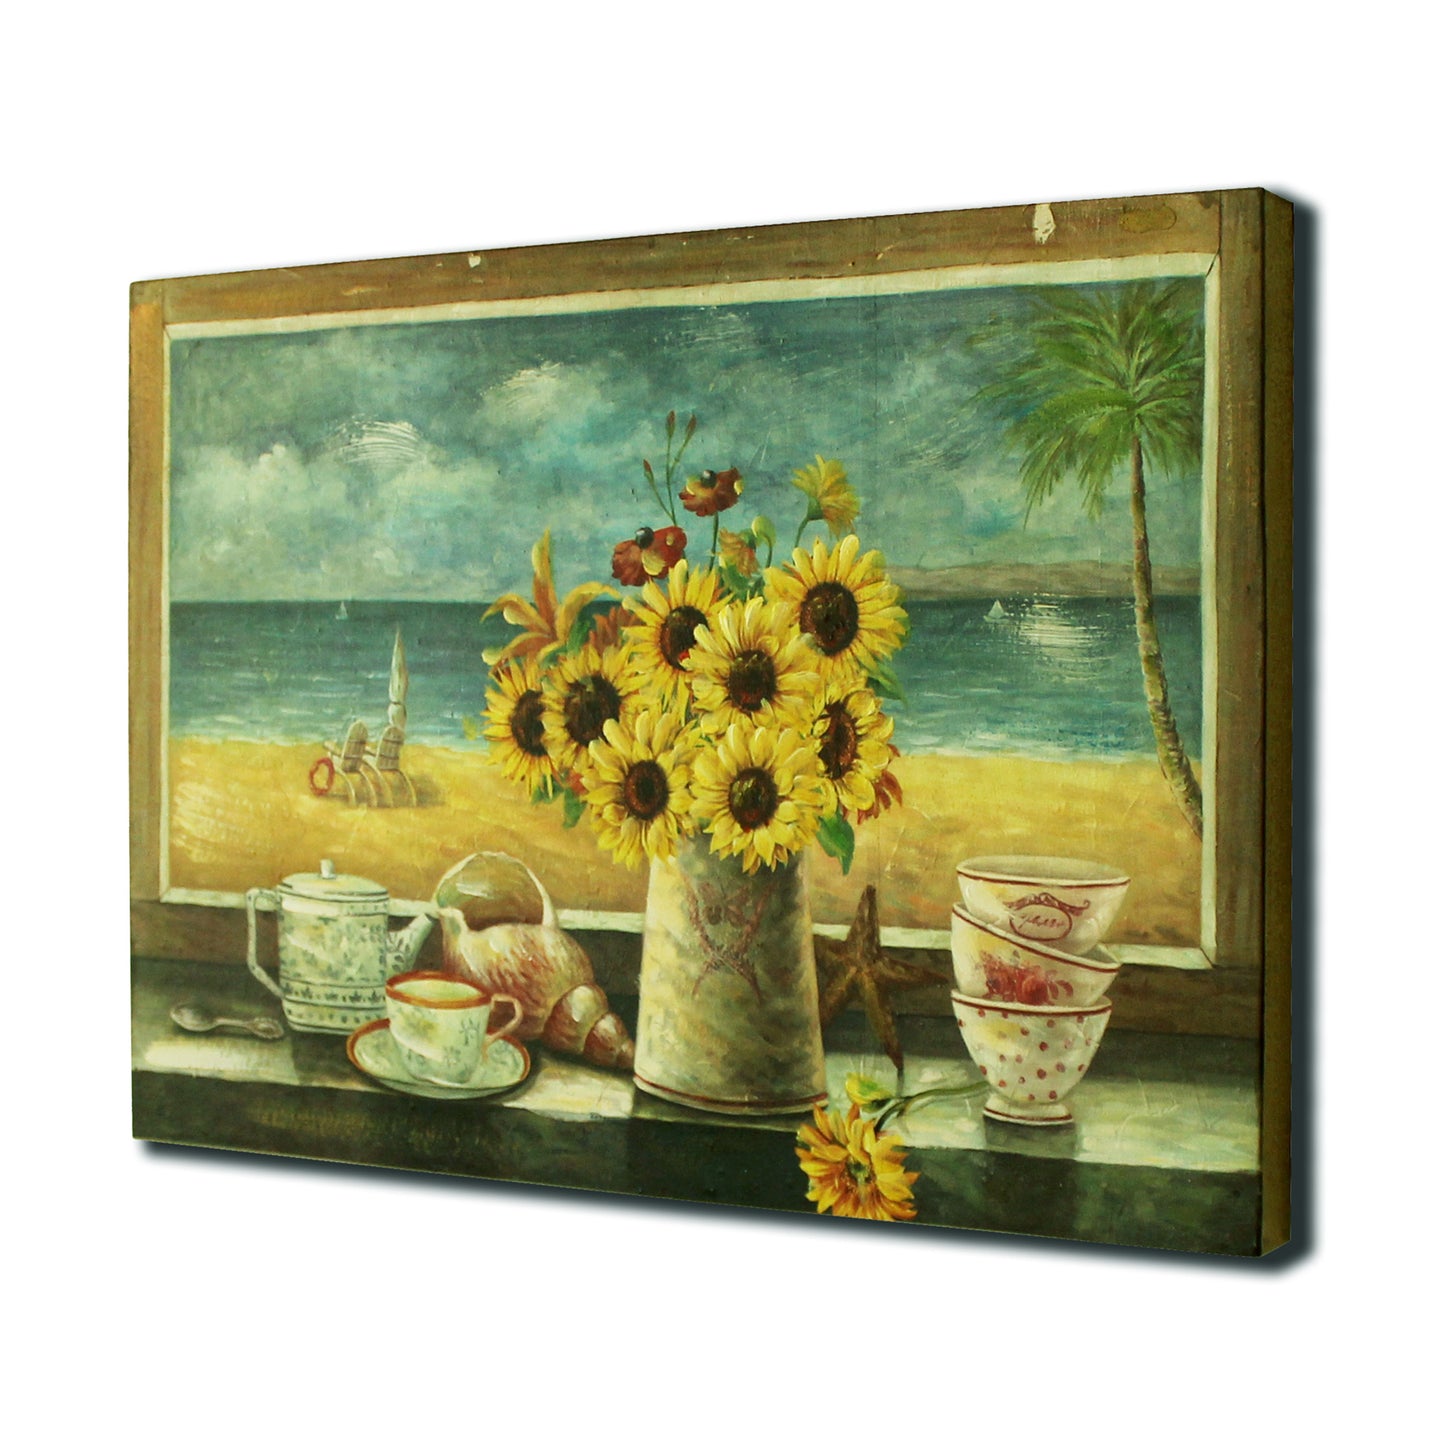 CVHOMEDECO. Primitives Rustic Hand Painted Wooden Frame Wall Hanging 3D Painting Decoration Art, Sunflower in Jar Design, 15.75 x 11.75 Inch